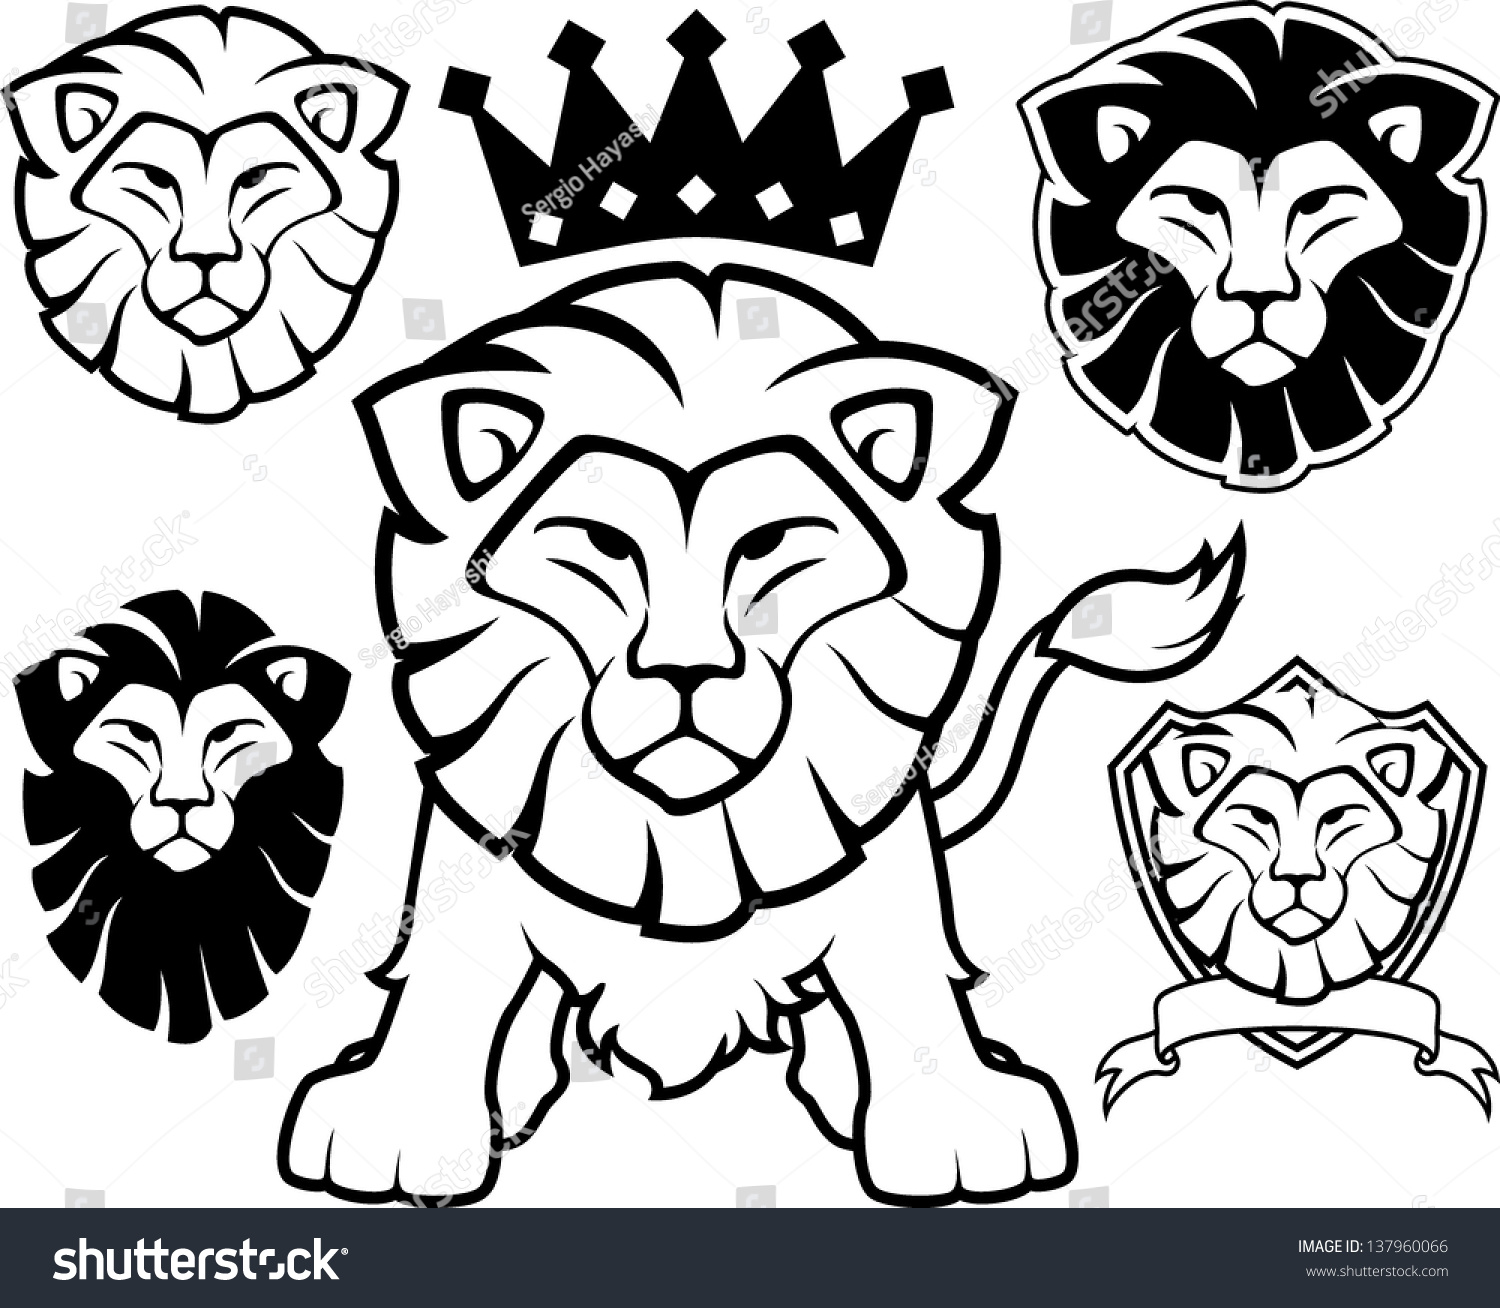 Lion Head Designs Isolated On White Stock Vector (Royalty Free ...